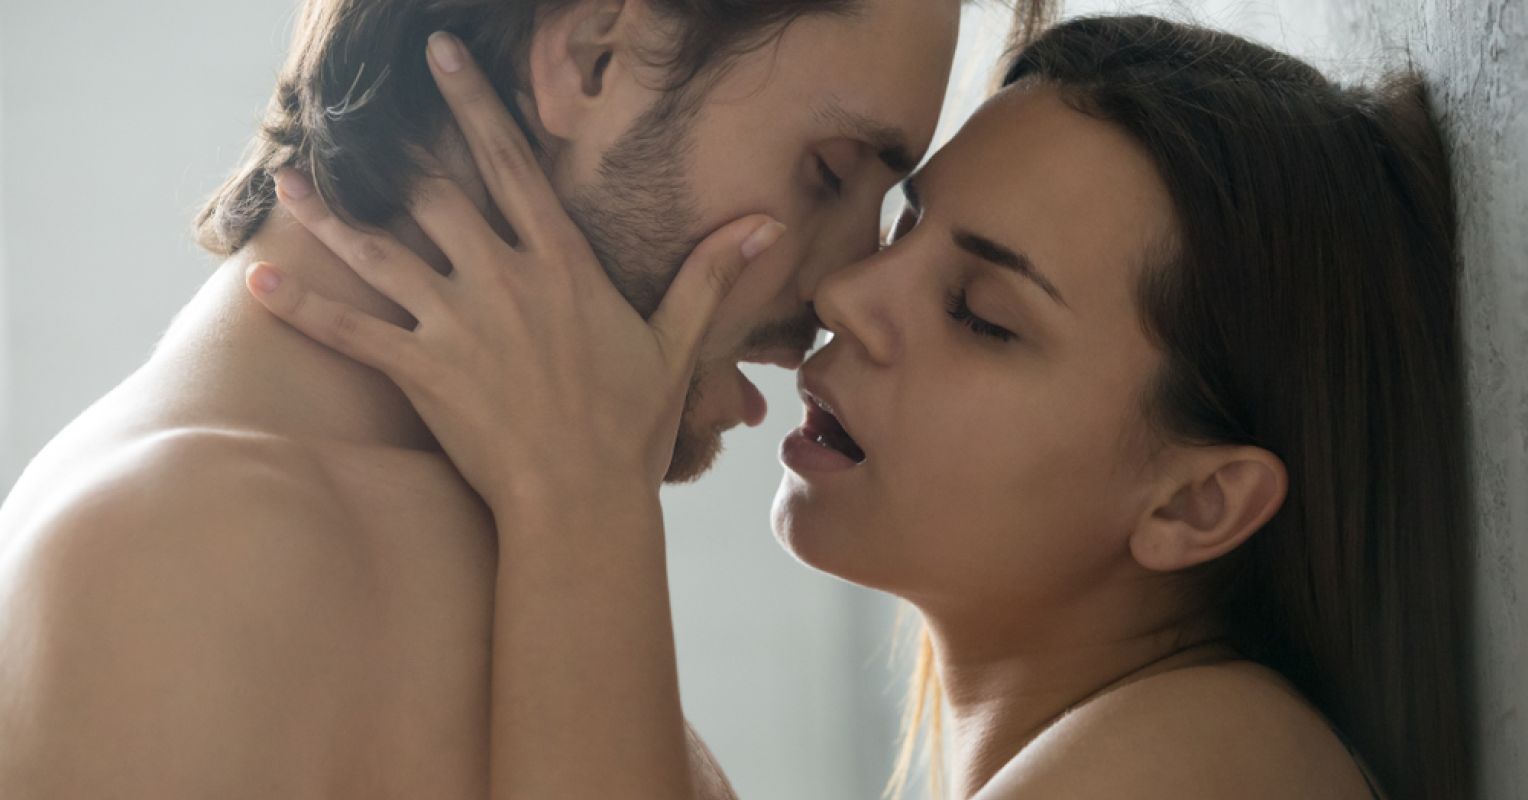 Screaming Romantic Porn Videos - Why We Scream and Moan During Sex | Psychology Today